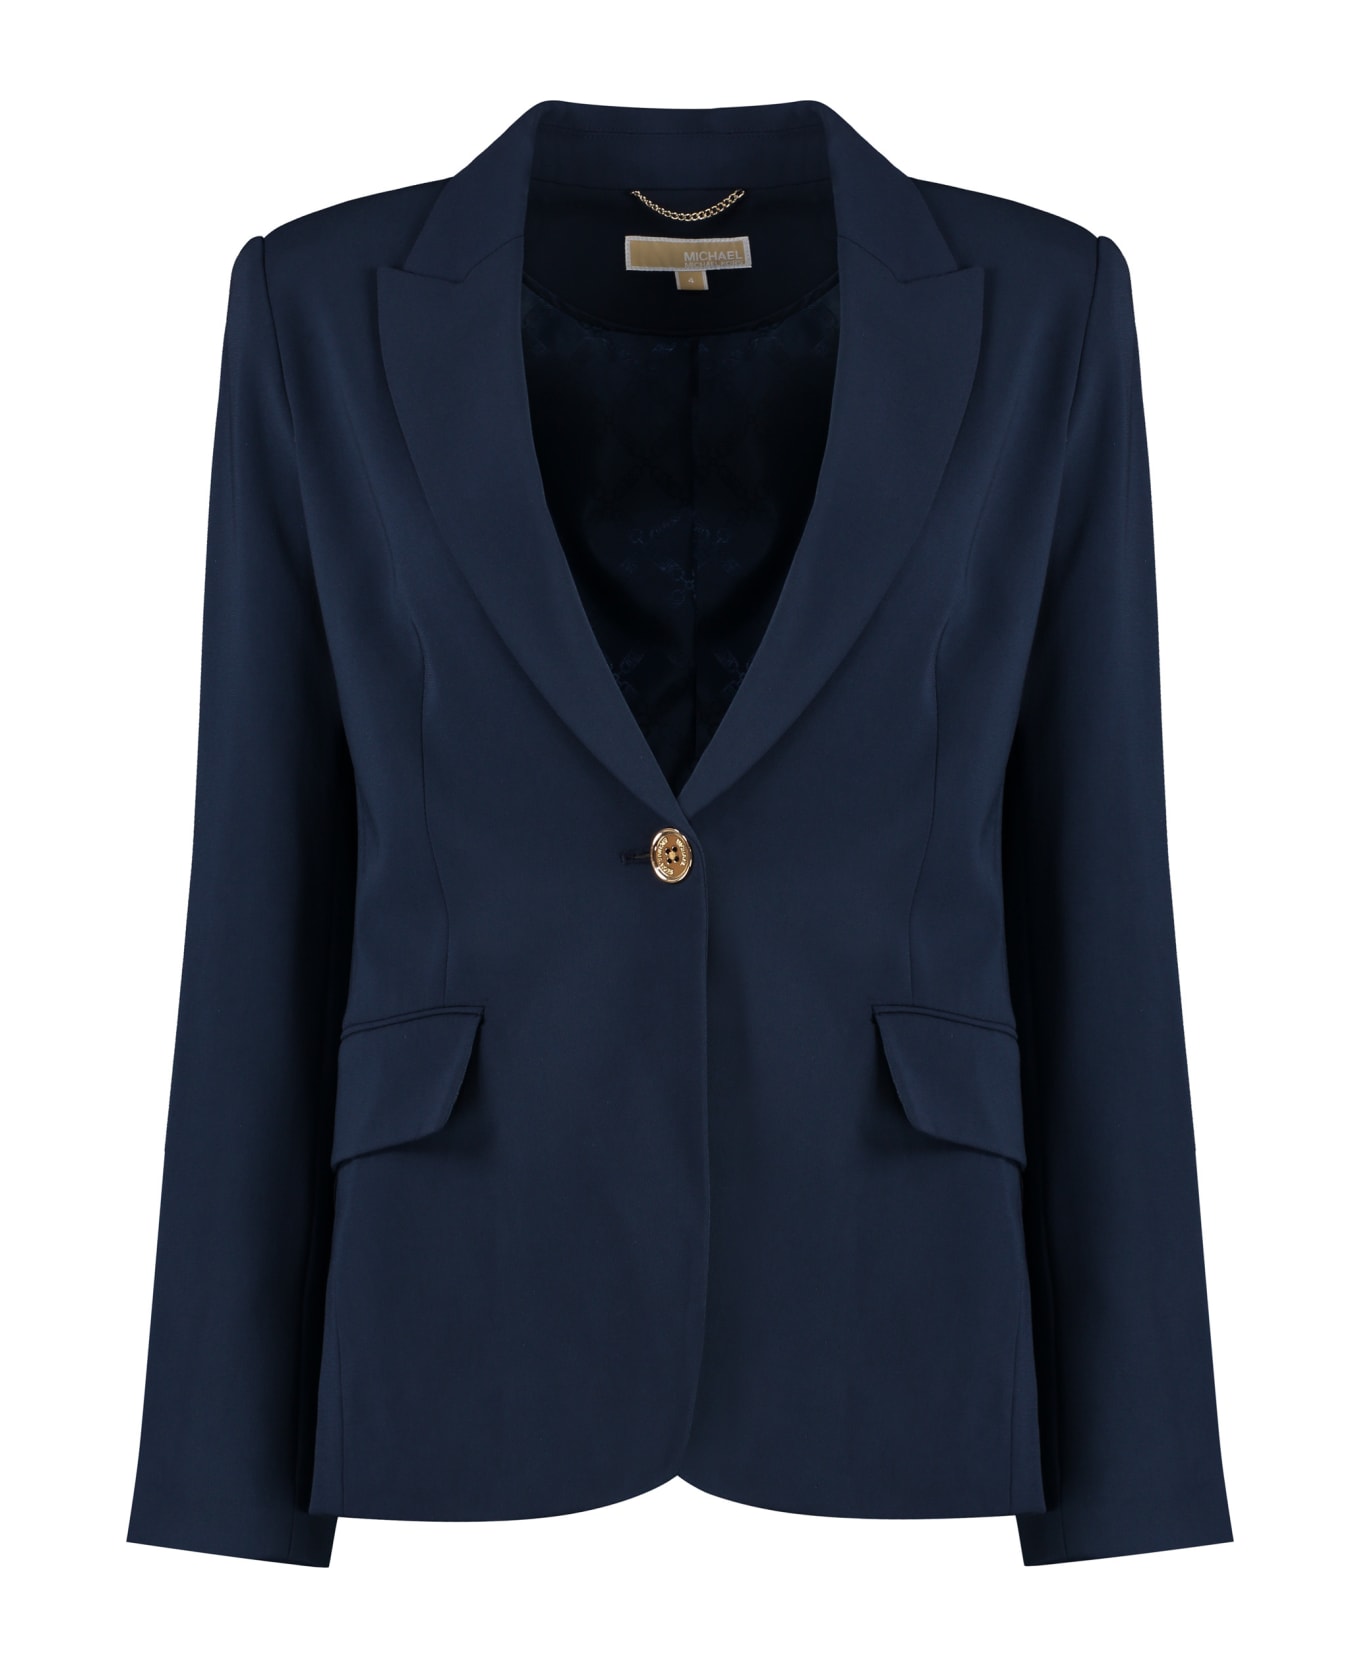 Michael Kors Single-breasted One Button Jacket - blue